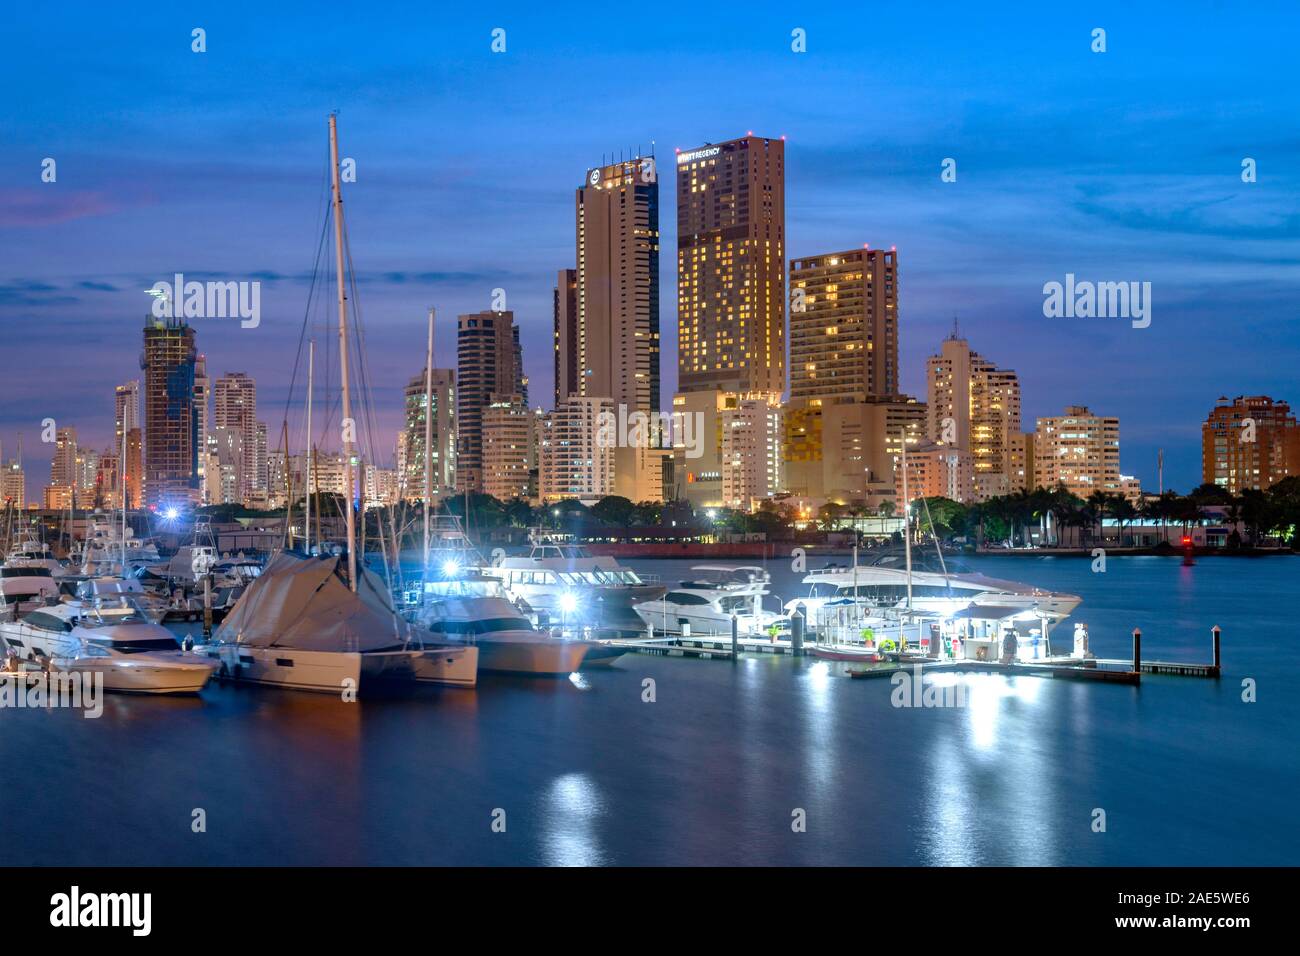 Dusk view of the modern Bocagrande skyline in Cartagena, Colombia. Stock Photo